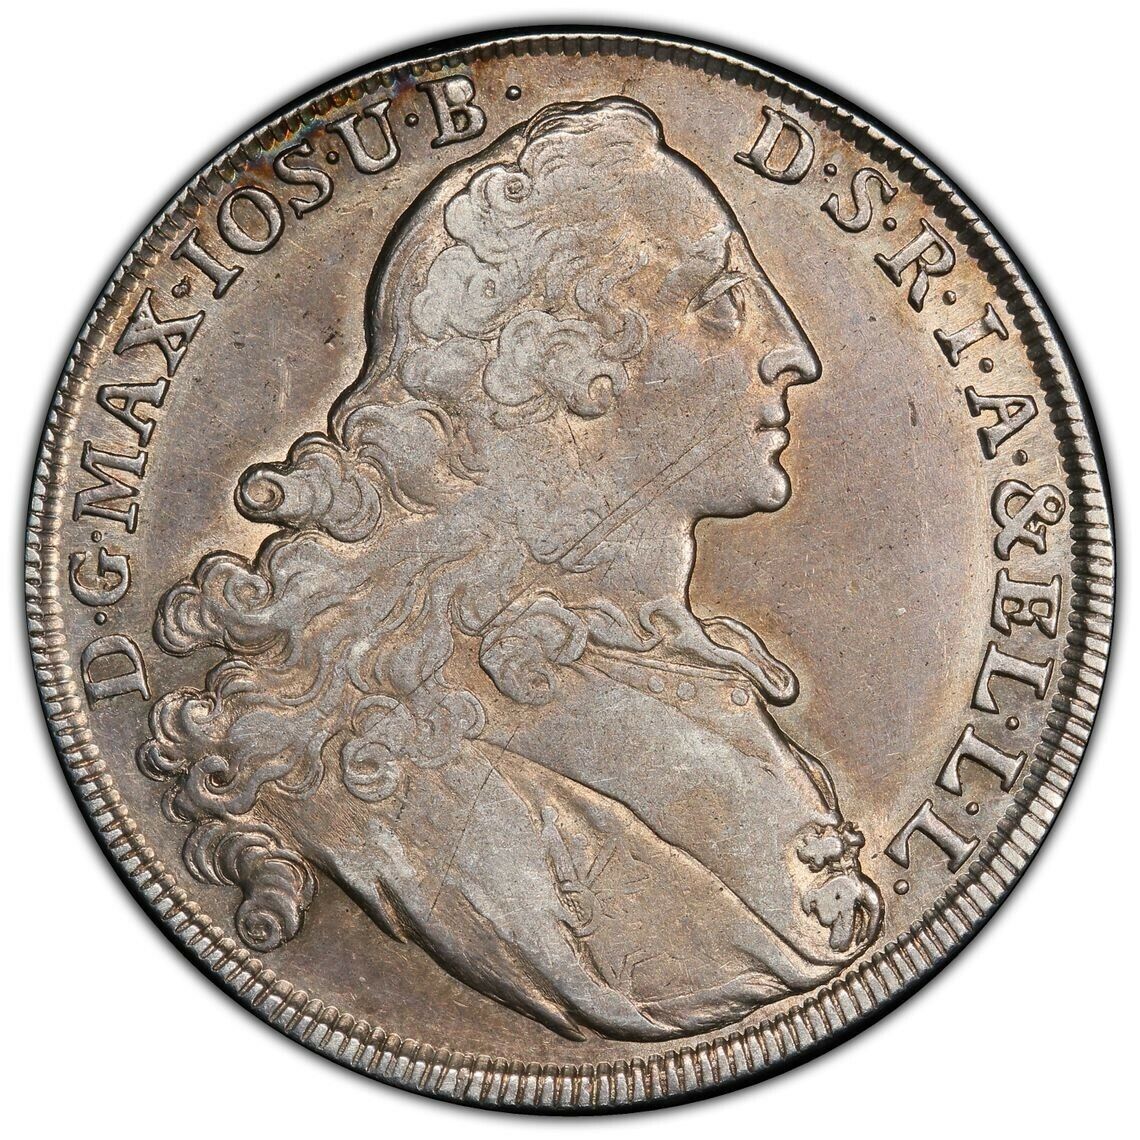 1765 German States Bavaria Thaler - PCGS XF Details - Great Looking Coin!